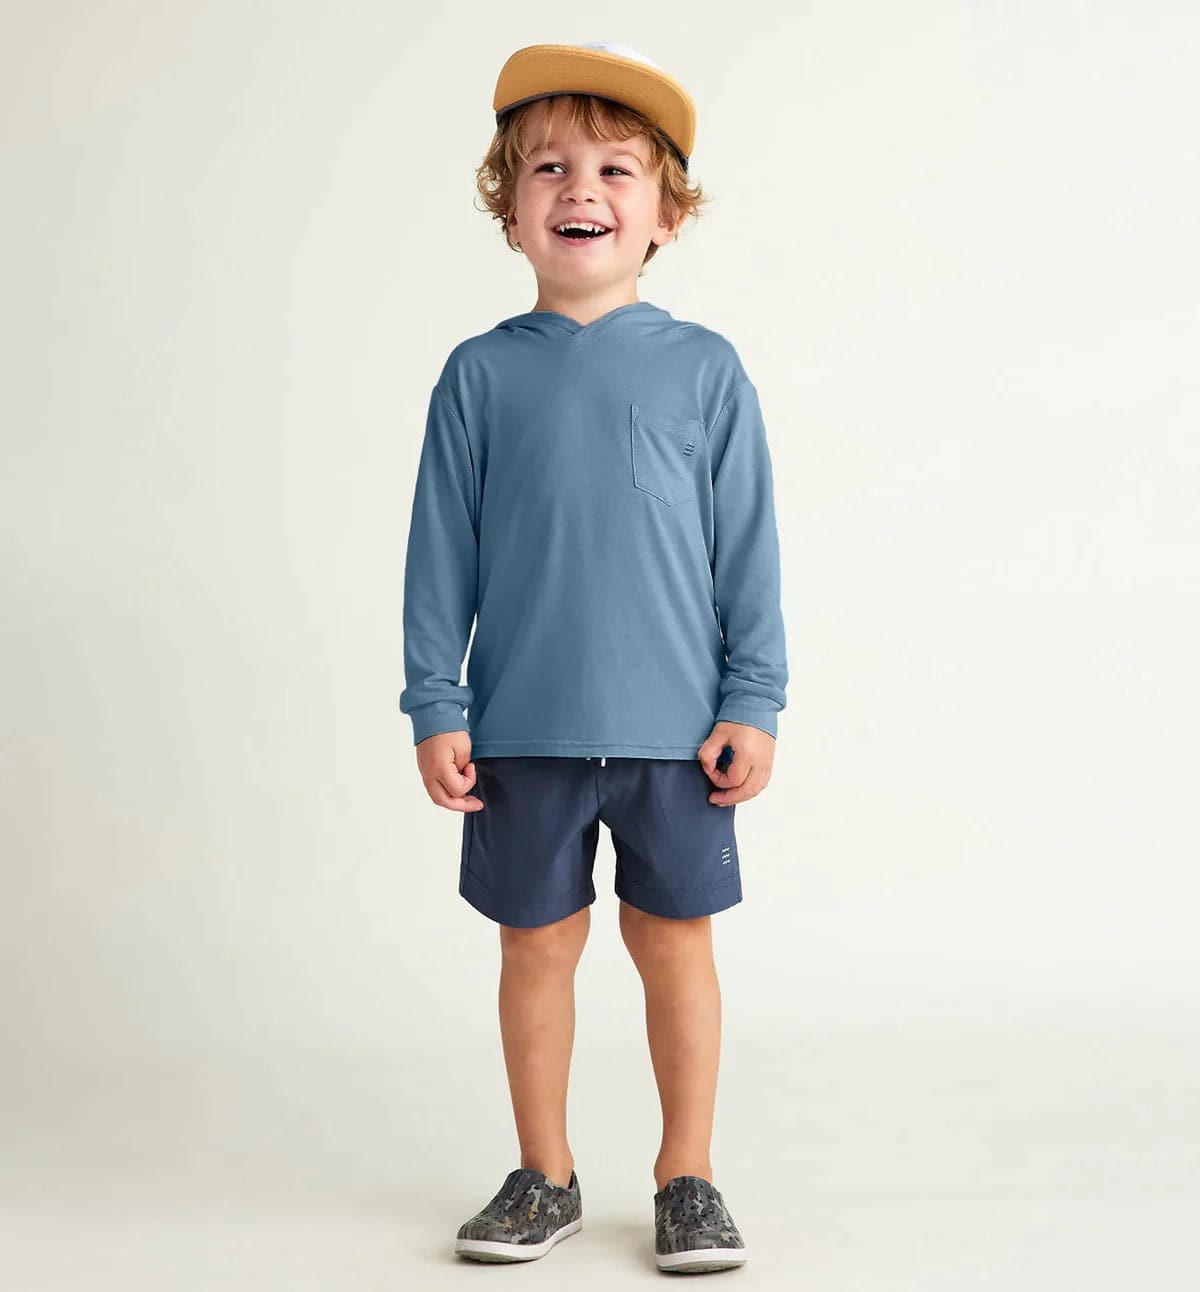 Featuring the Toddler Bamboo Shade Hoody kid's and babies, kid's thermal layering manufactured by Free Fly shown here from a seventh angle.